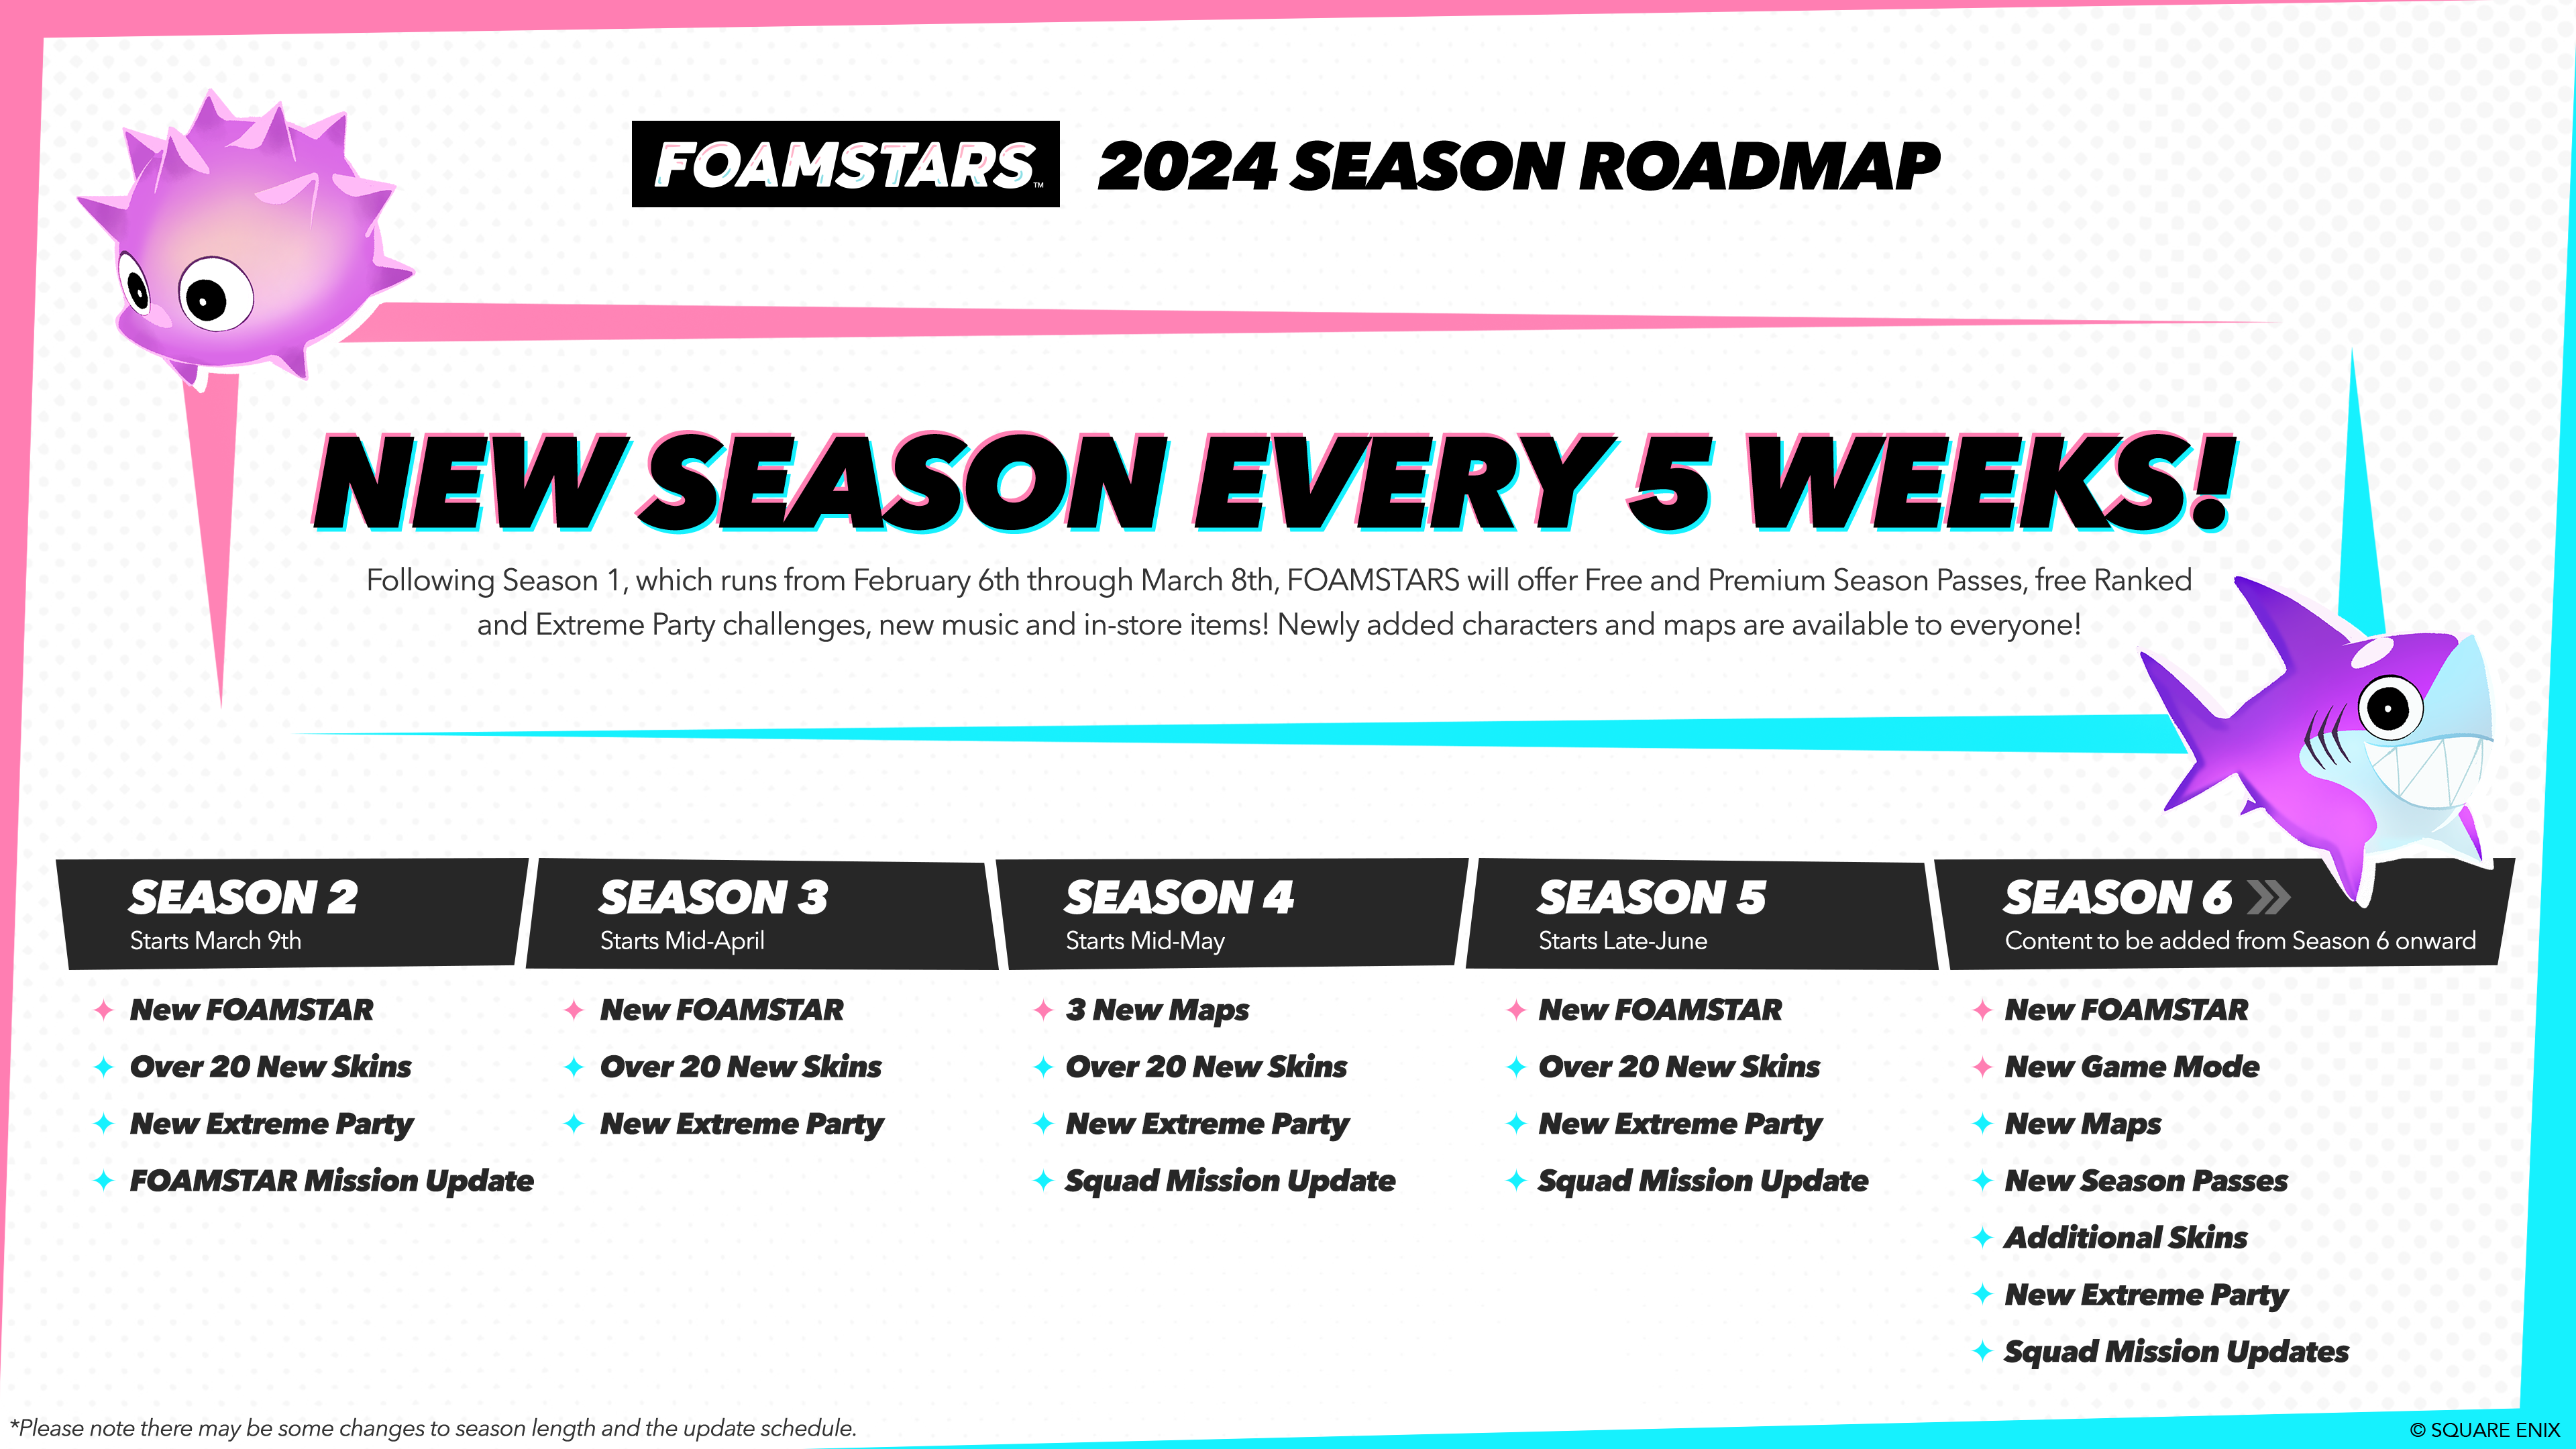 Foamstars details first season, and full seasonal road map for 2024